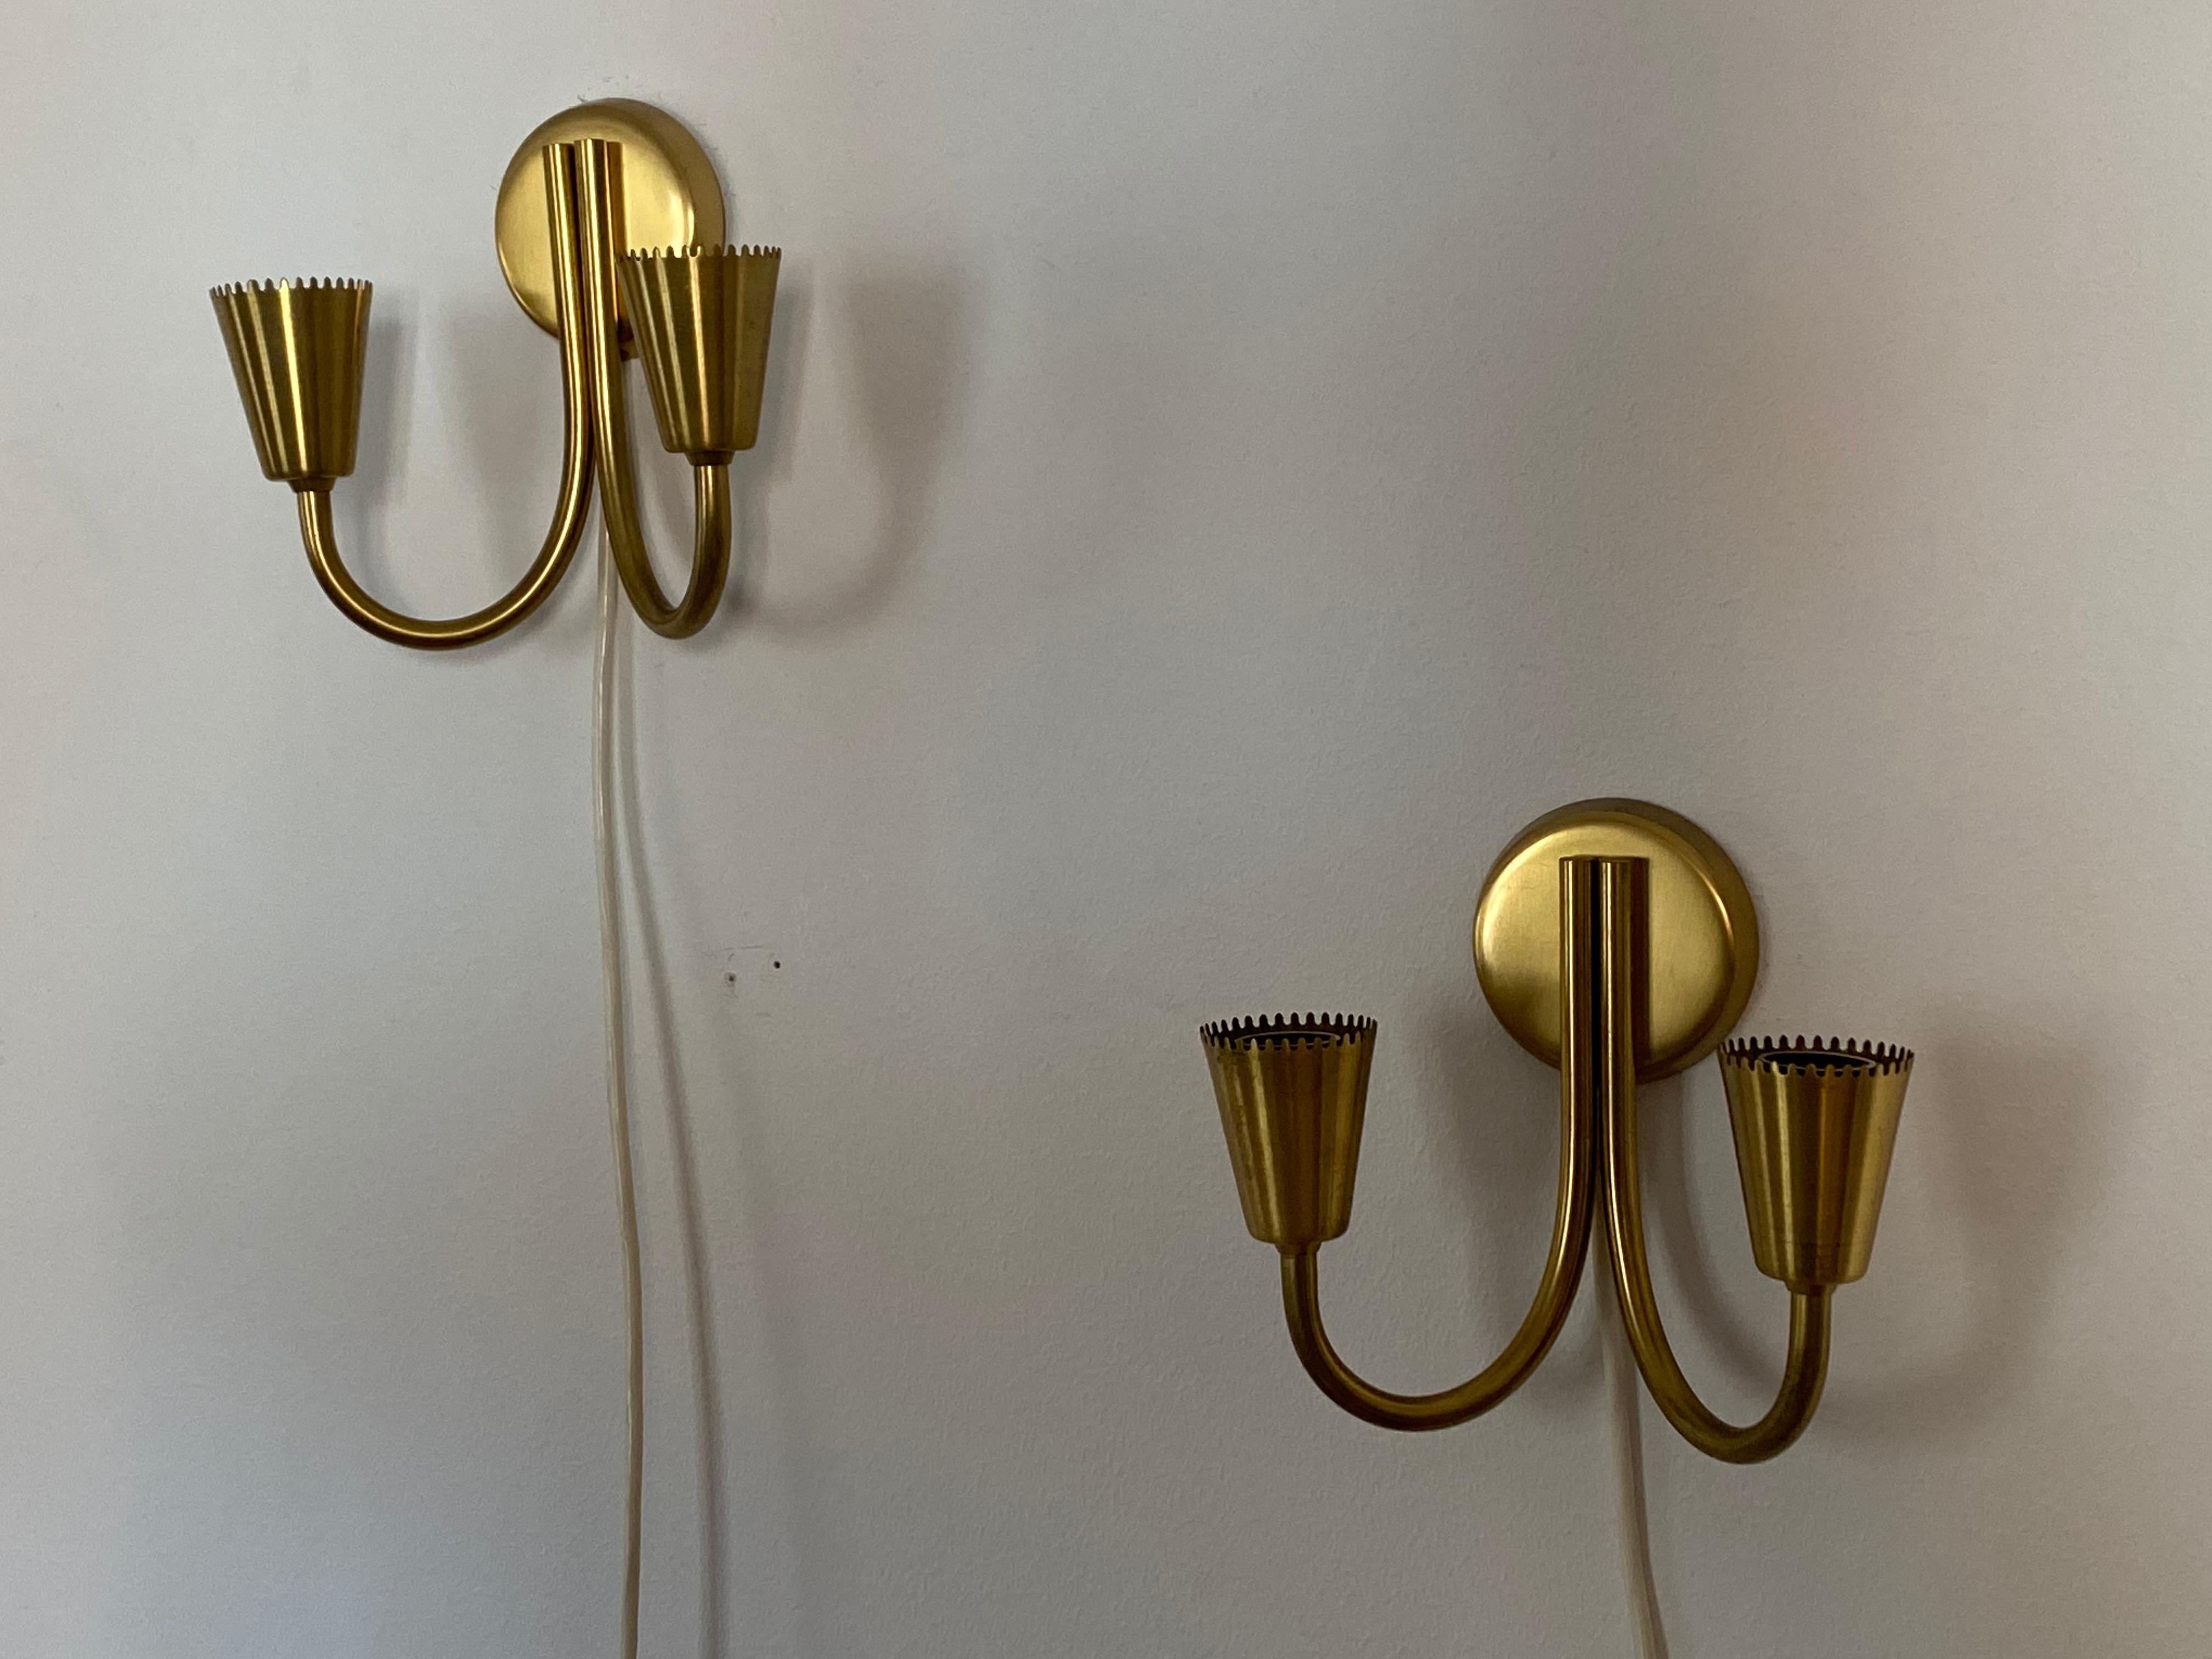 A pair of two-armed wall sconces / wall lights, designed and produced by Lyfa, Denmark, 1950s. Originally mounted with glass shades, now with brand new linen lampshades. 

Other designers of the period include Paavo Tynell, Jean Royère, Josef